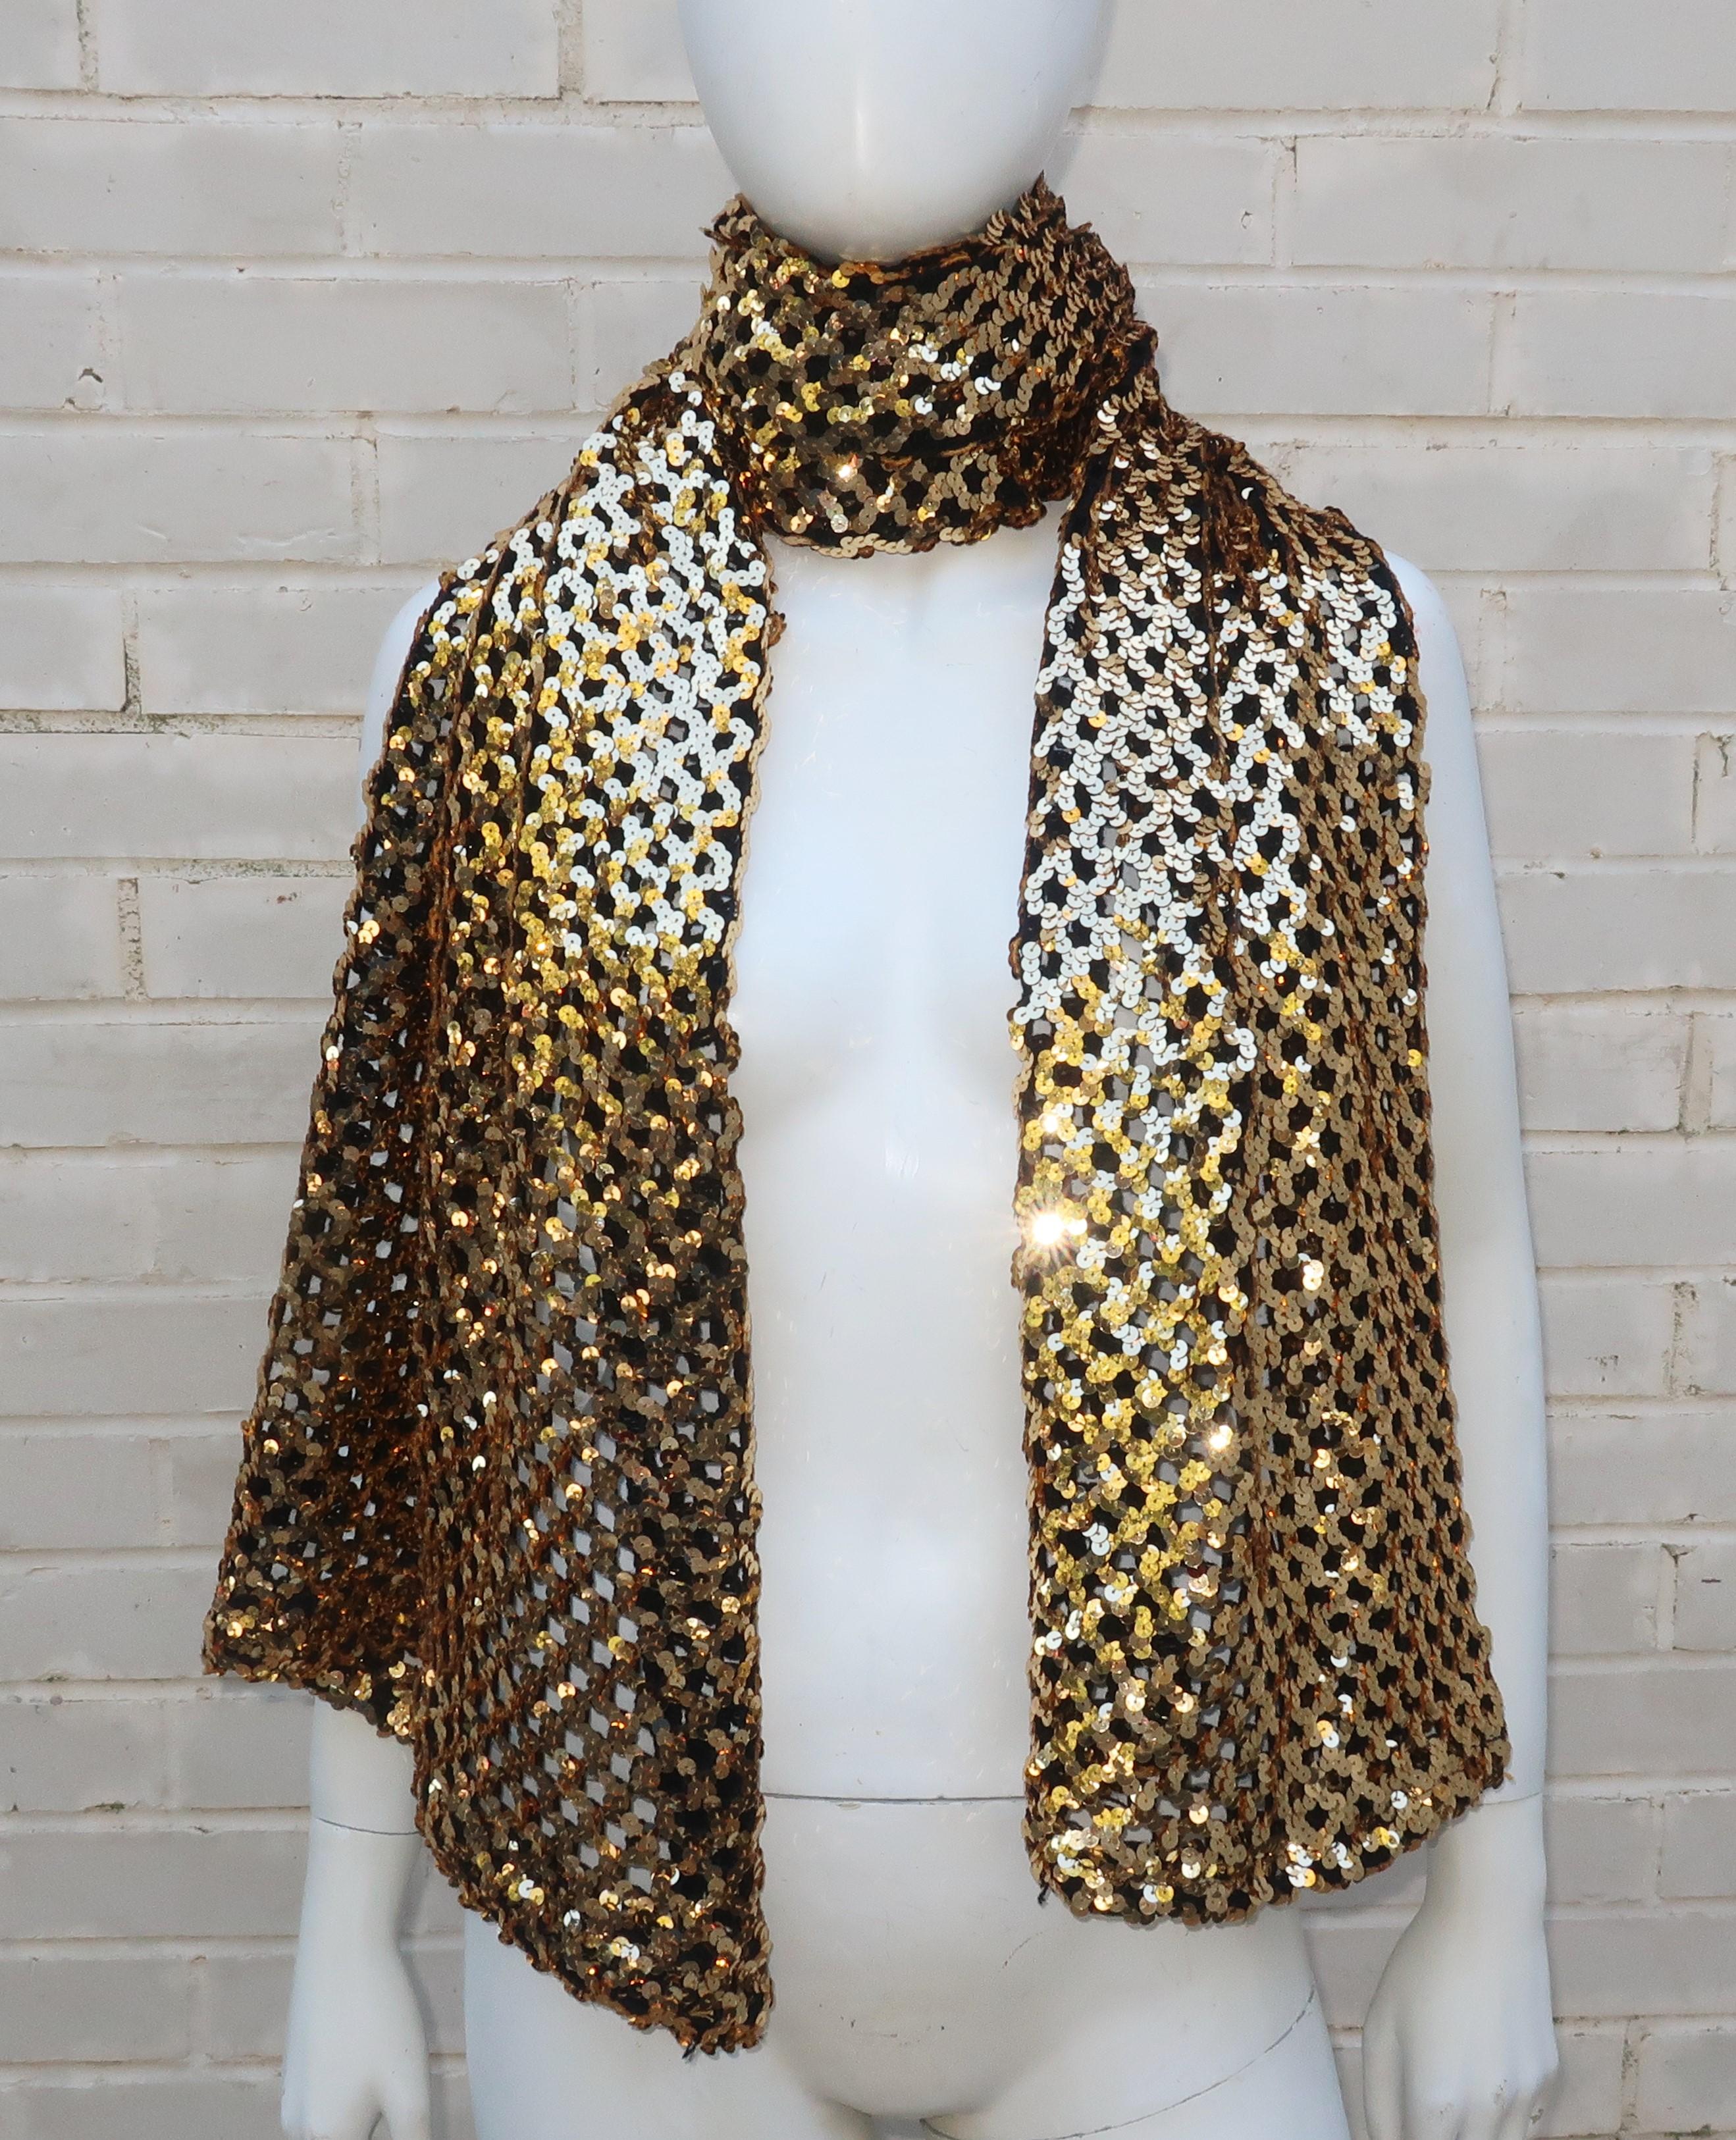 Sassy sequins!  Wrap yourself in a black wool knit crochet scarf embellished on one side with gold sequins that shimmer at every turn.  The 71